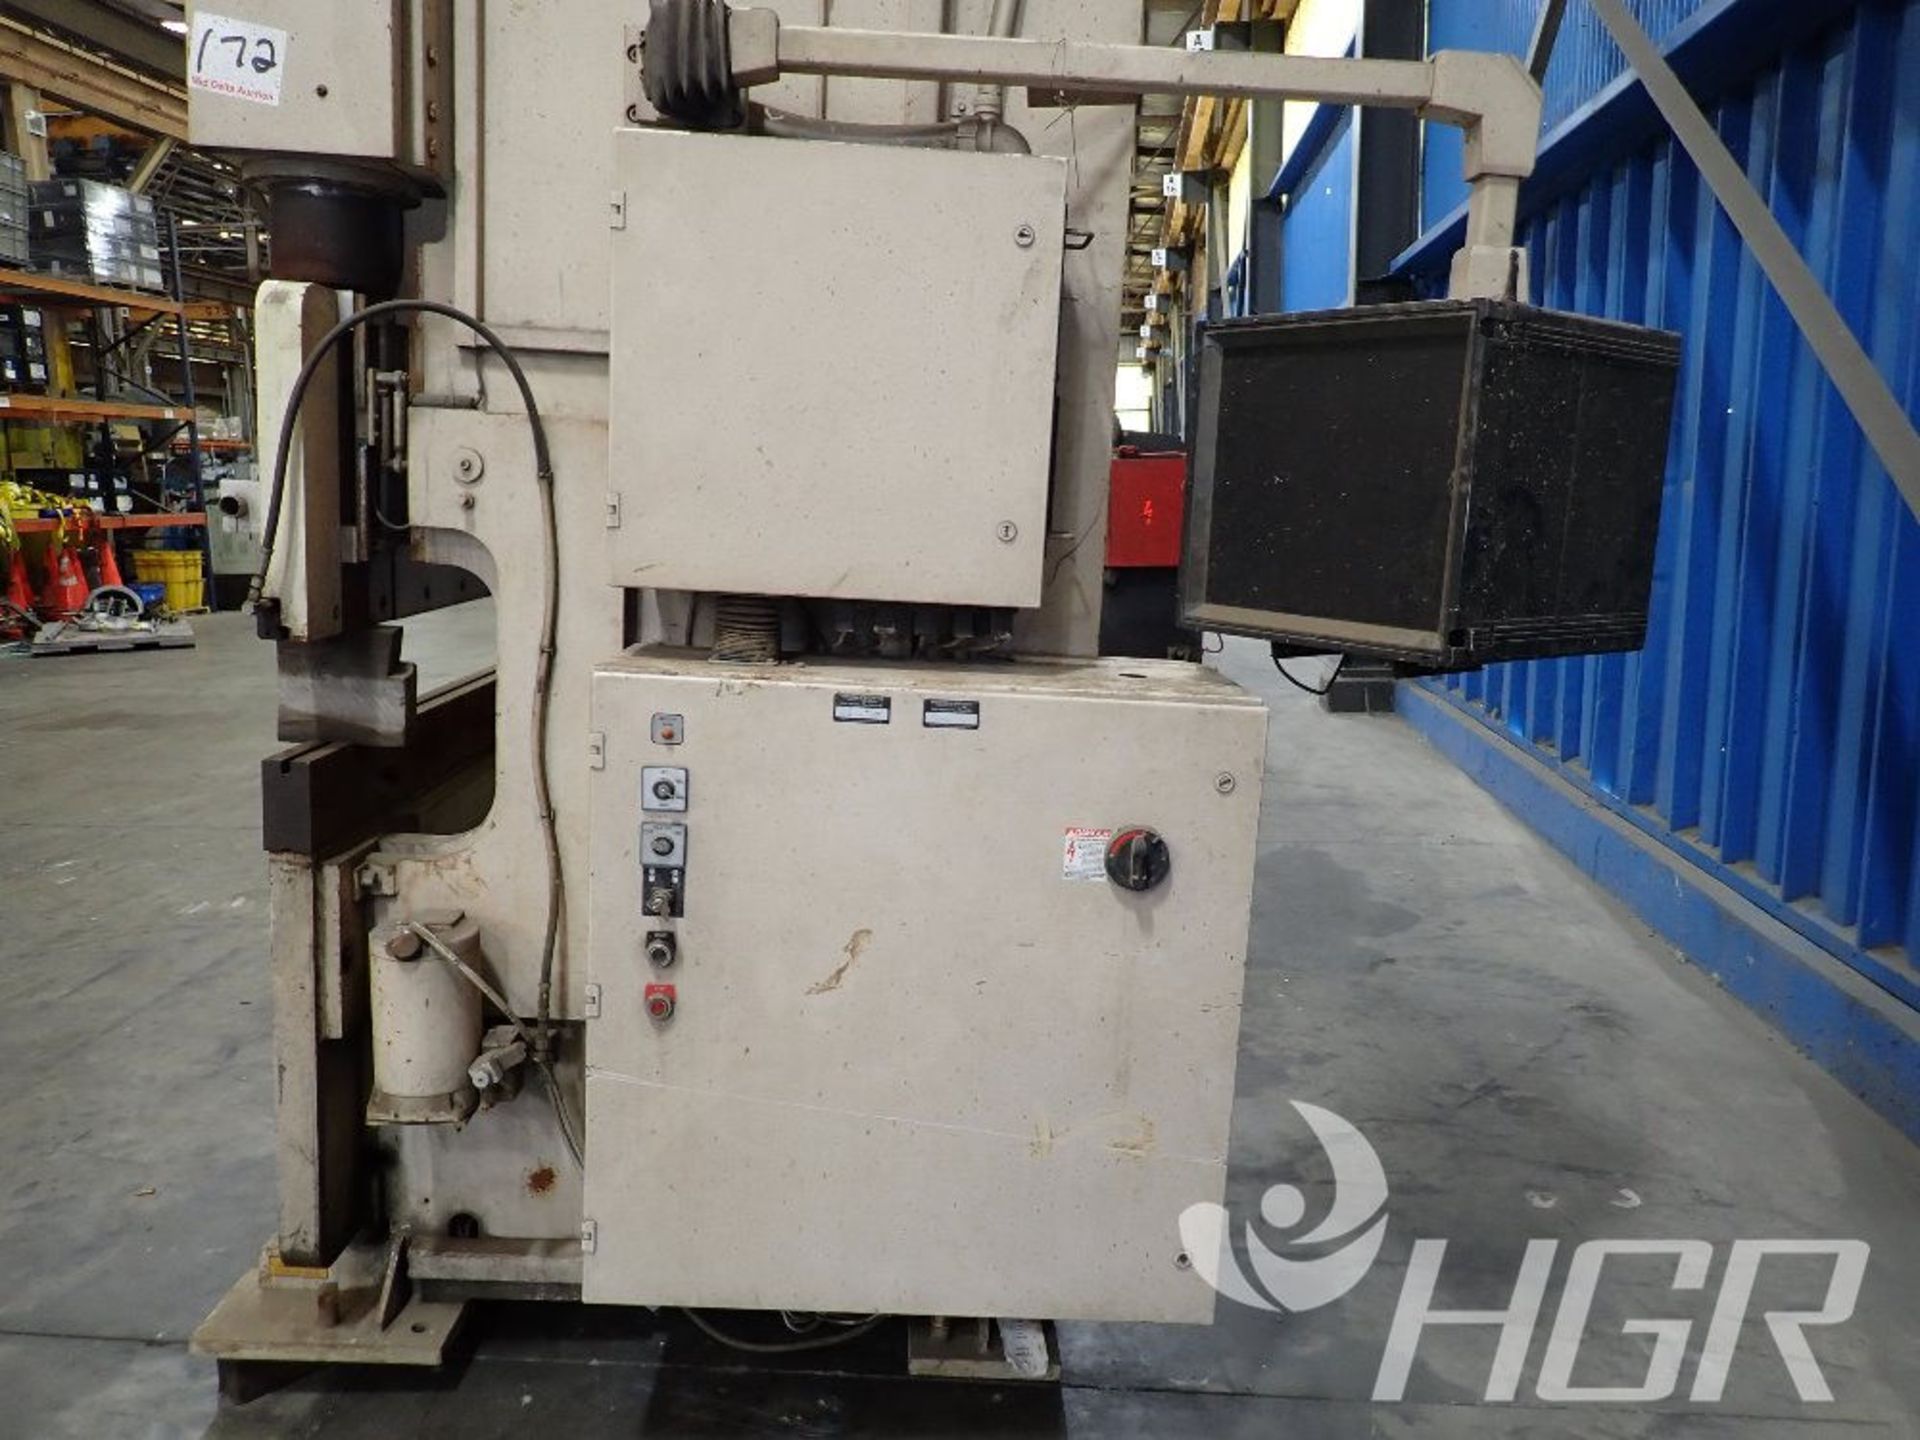 WYSONG CNC PRESS BRAKE, Model PHP100-120, Date: n/a; s/n HPB46-127-X, Approx. Capacity: 100 TON 10', - Image 6 of 25